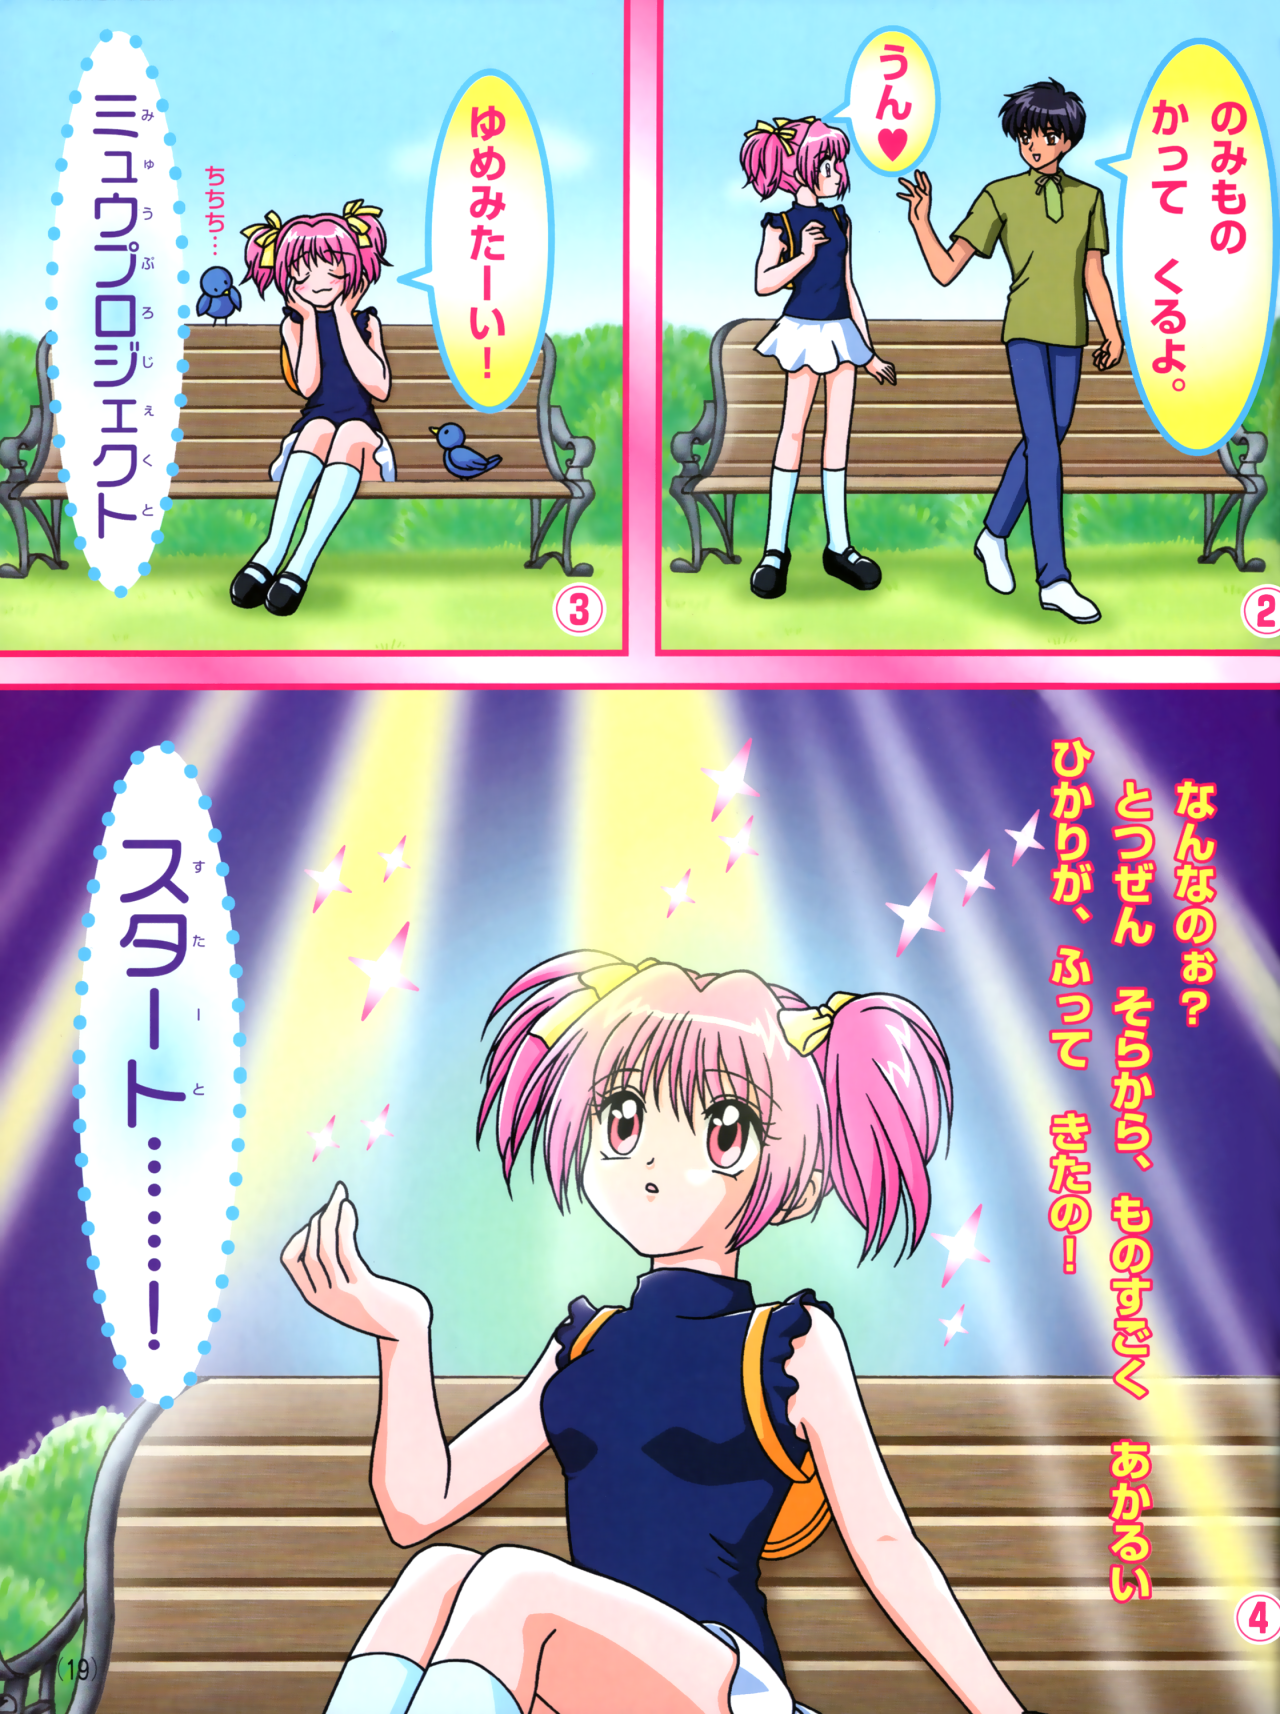 Yagami Central — The preview pics of Tokyo Mew Mew New Episode 24